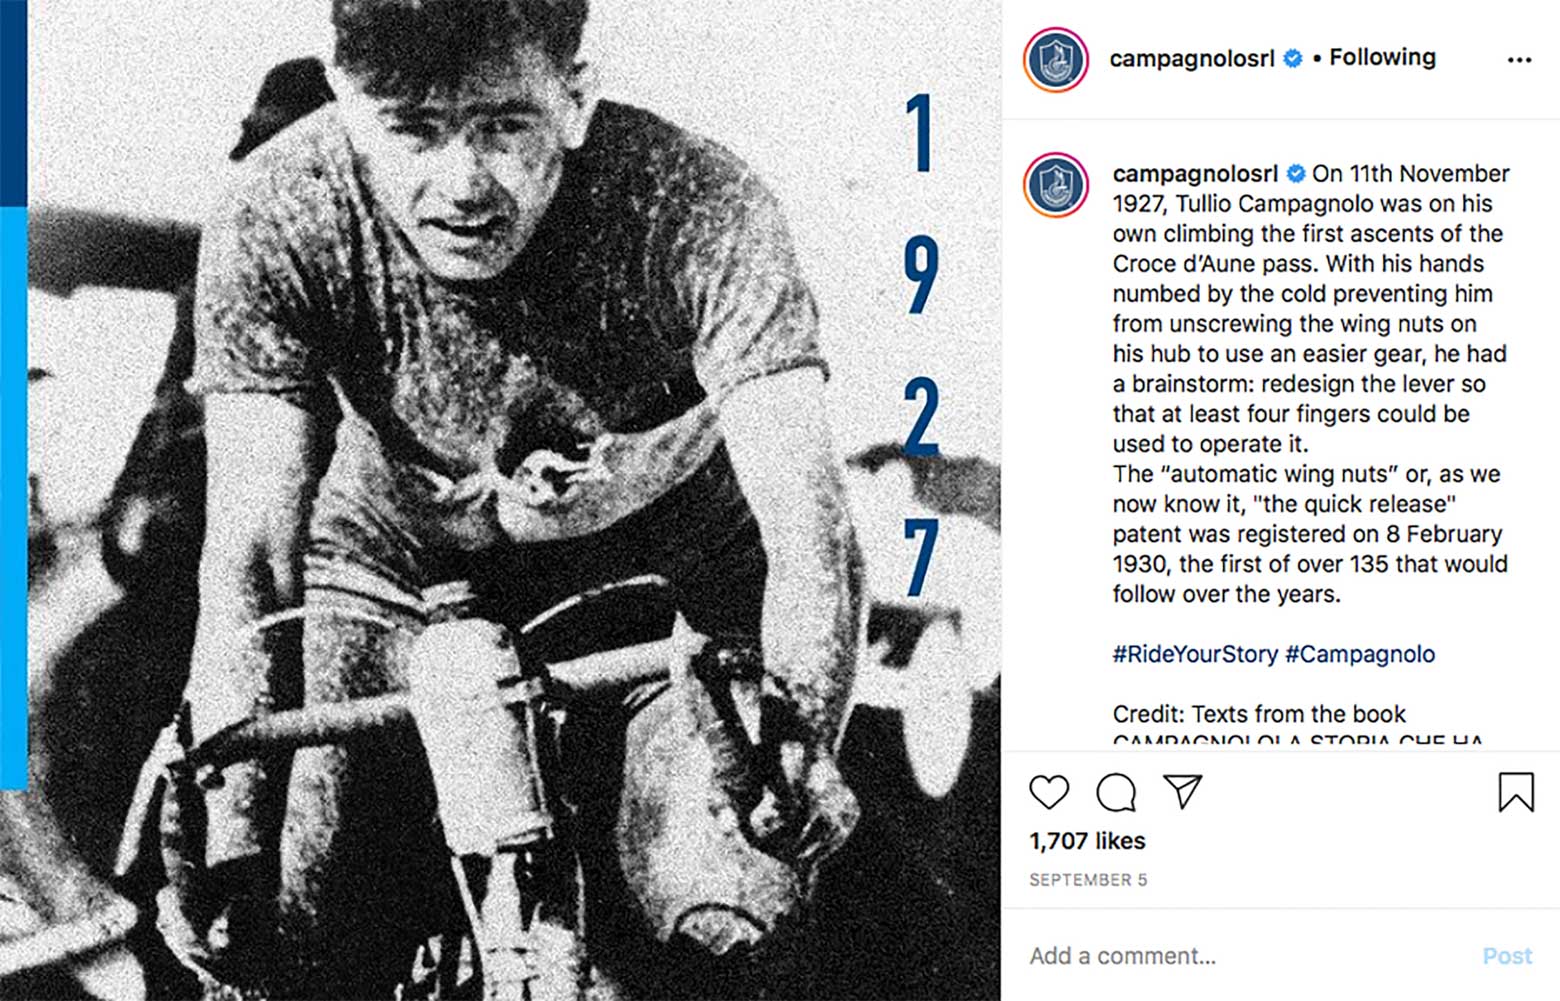 Campagnolo - Instagram history image 01 main image